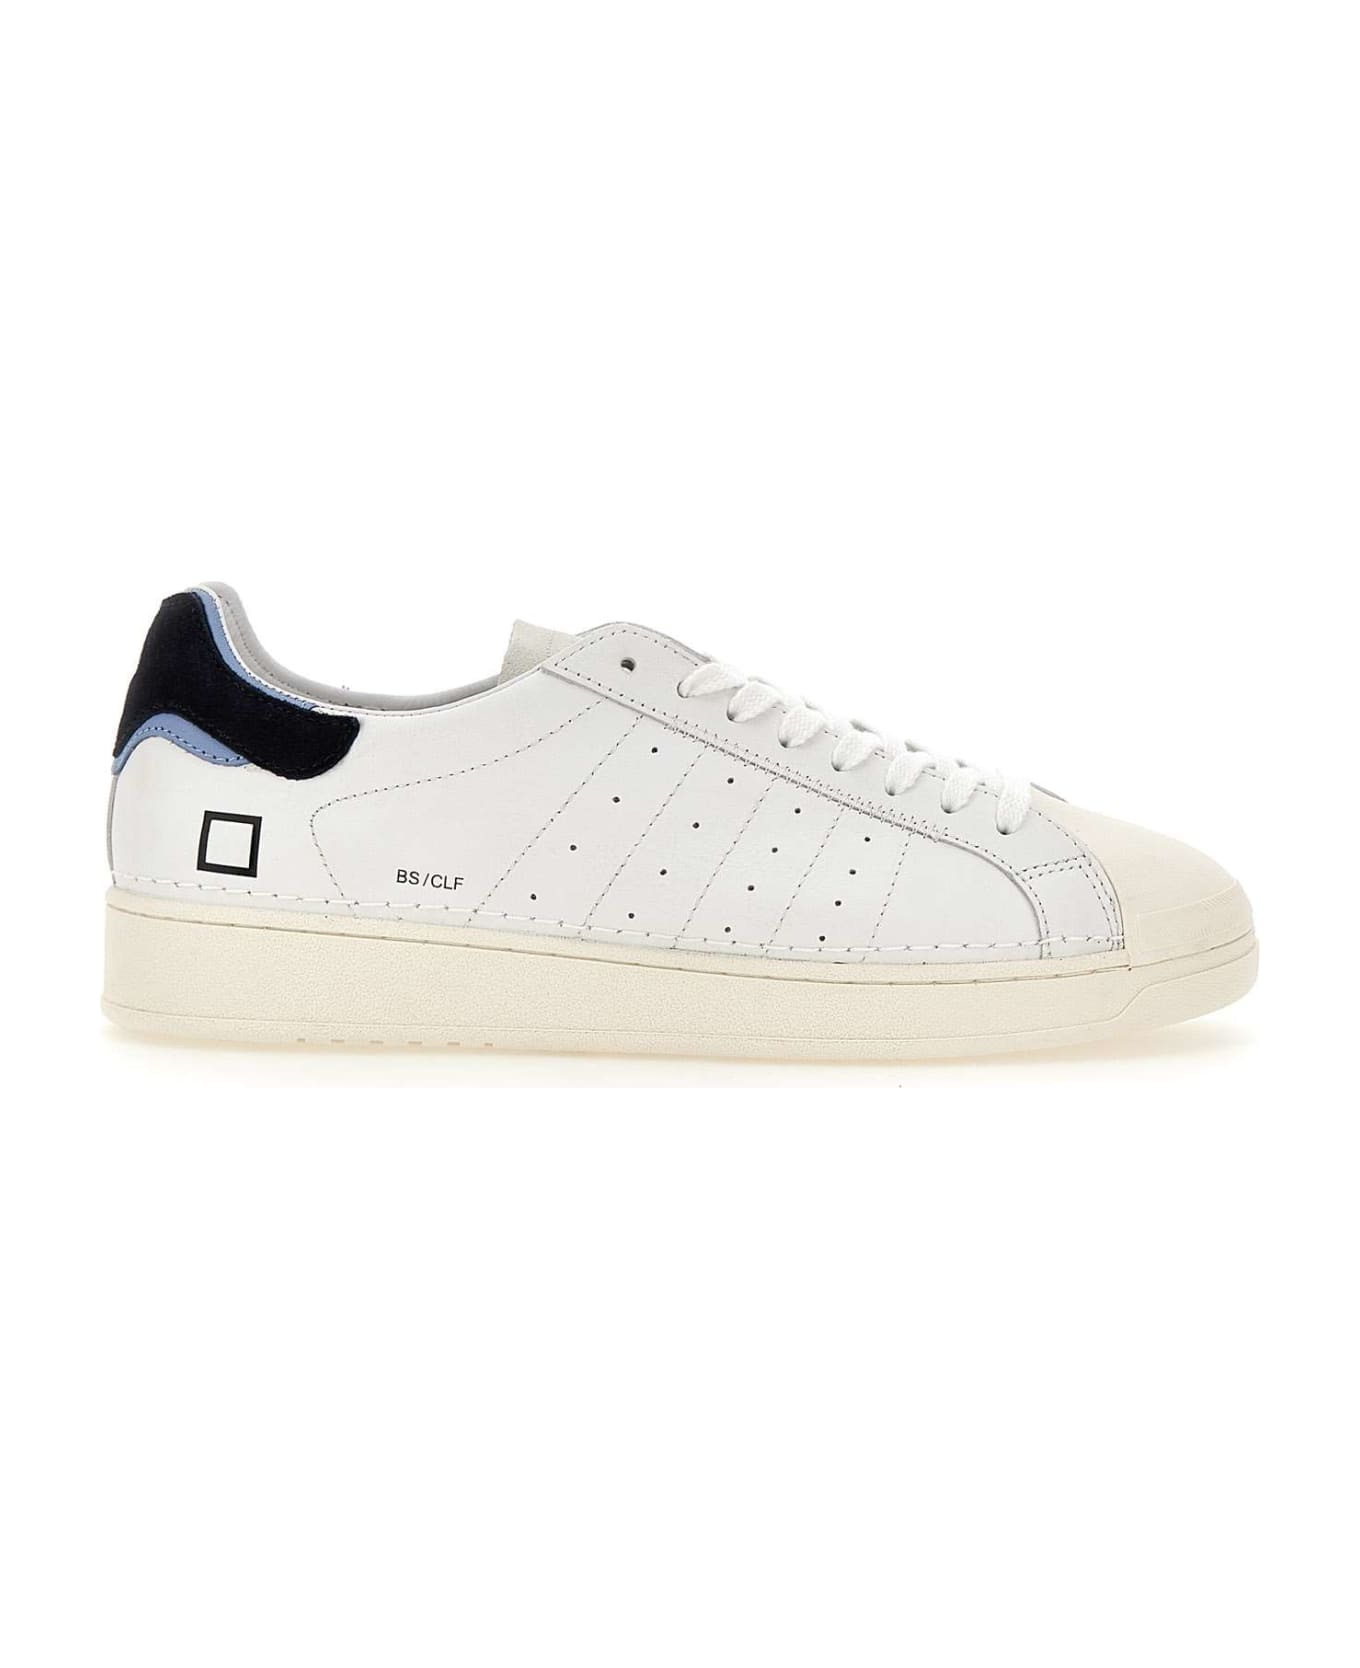 D.A.T.E. "base Calf" Leather Sneakers - WHITE-BLUE